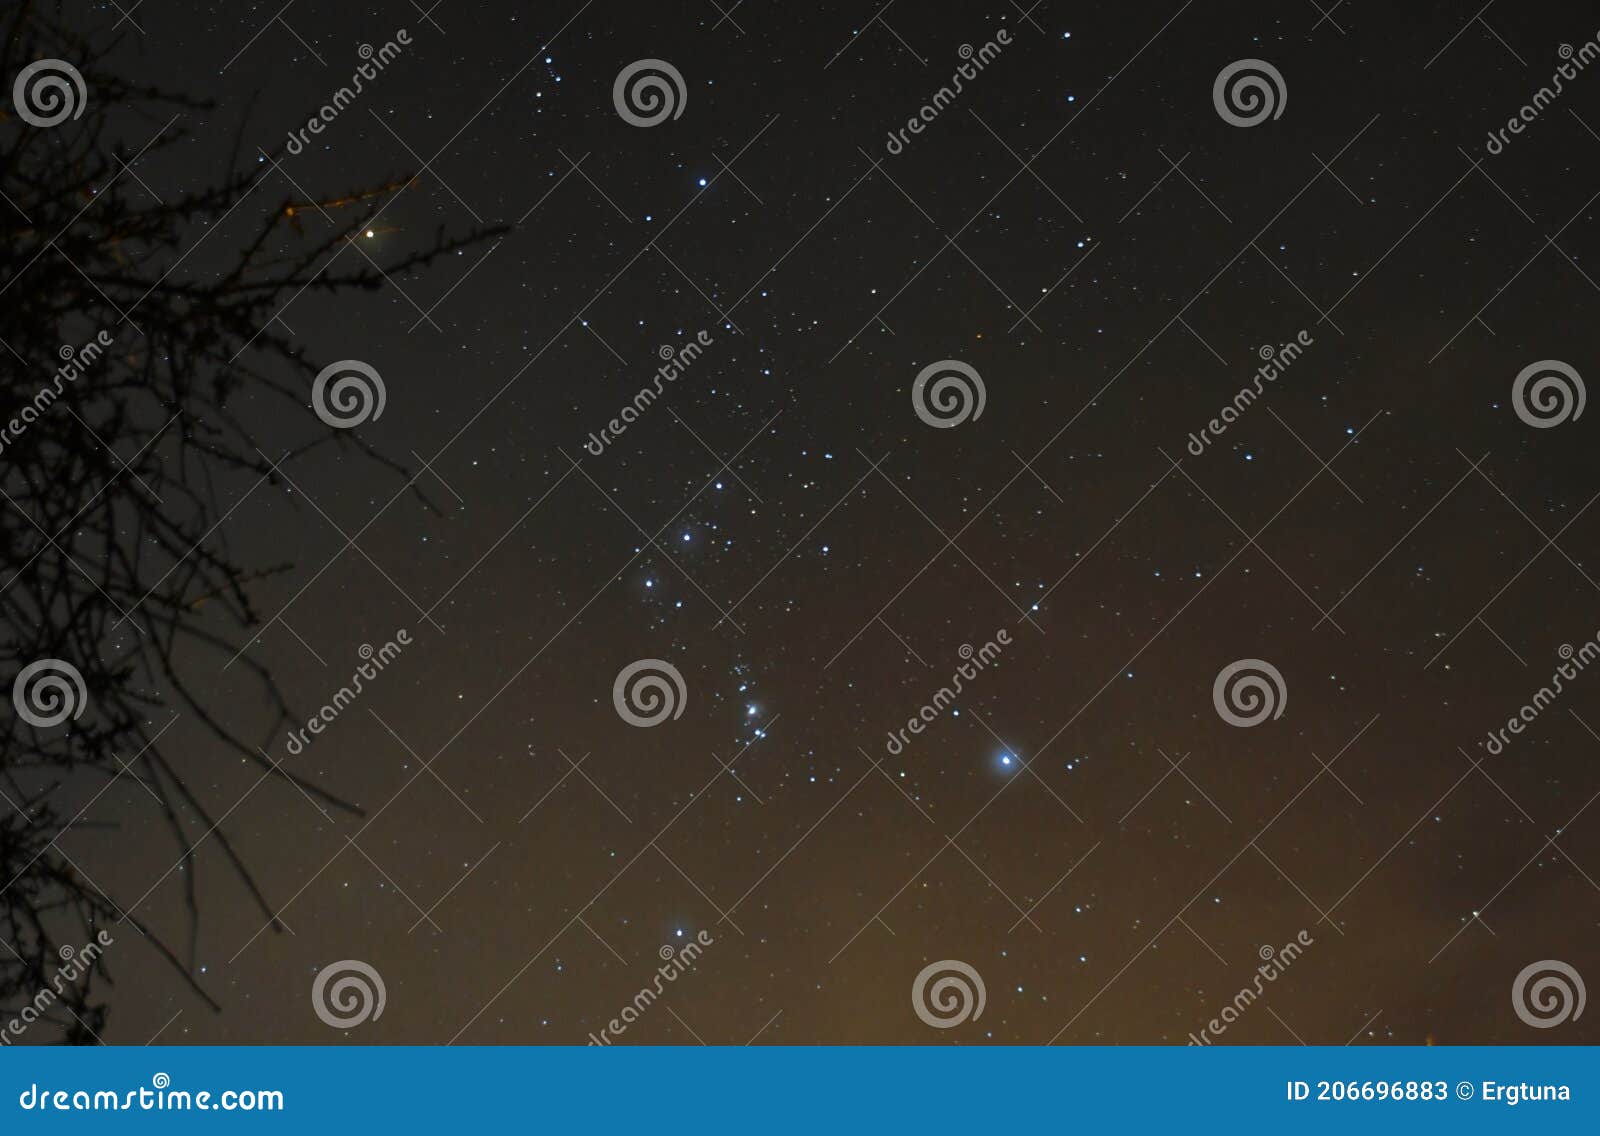 the constellation of orion